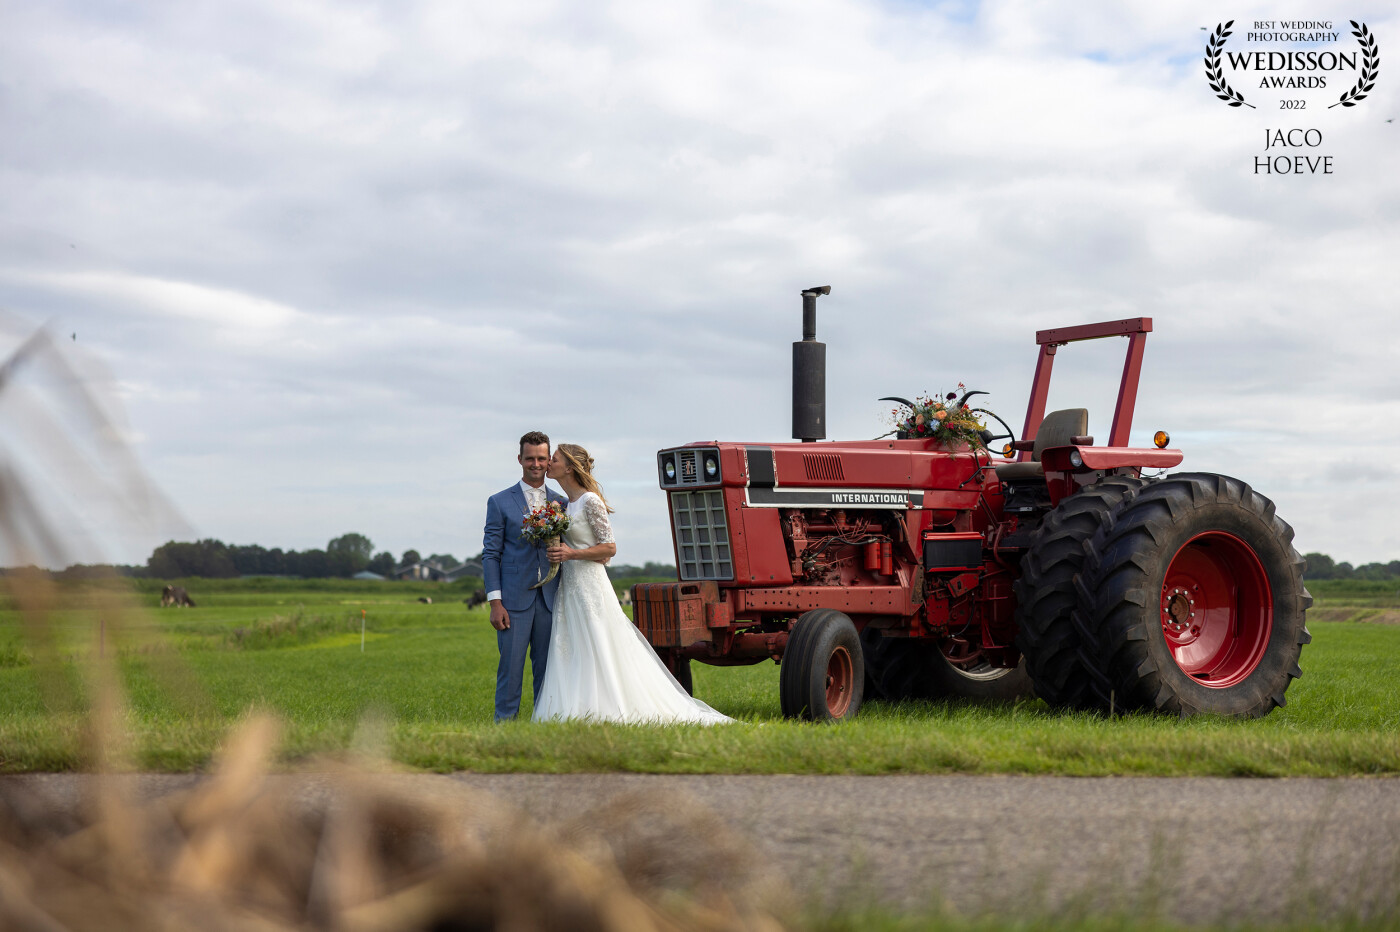 On a summer day we took this spherical photo on their dream day.<br />
The tractor, a special International, combines beautifully with the background colors of this photo.